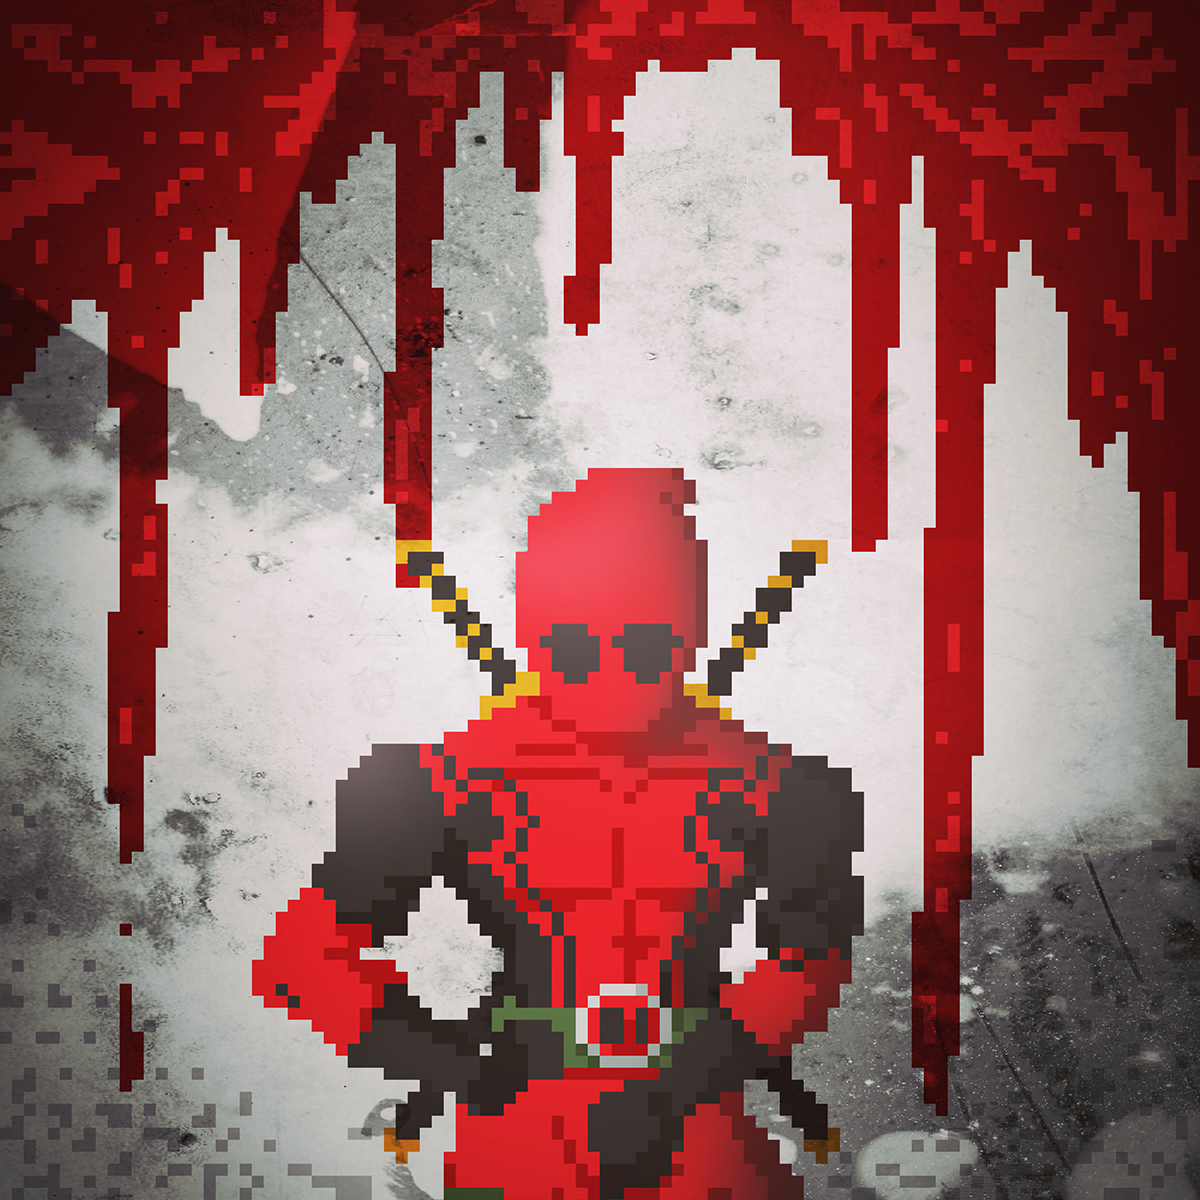 deadpool marvel comics THE MERC WITH A MOUTH itch Pixel art PIX3L_NATION the other user Aliffira Rezza